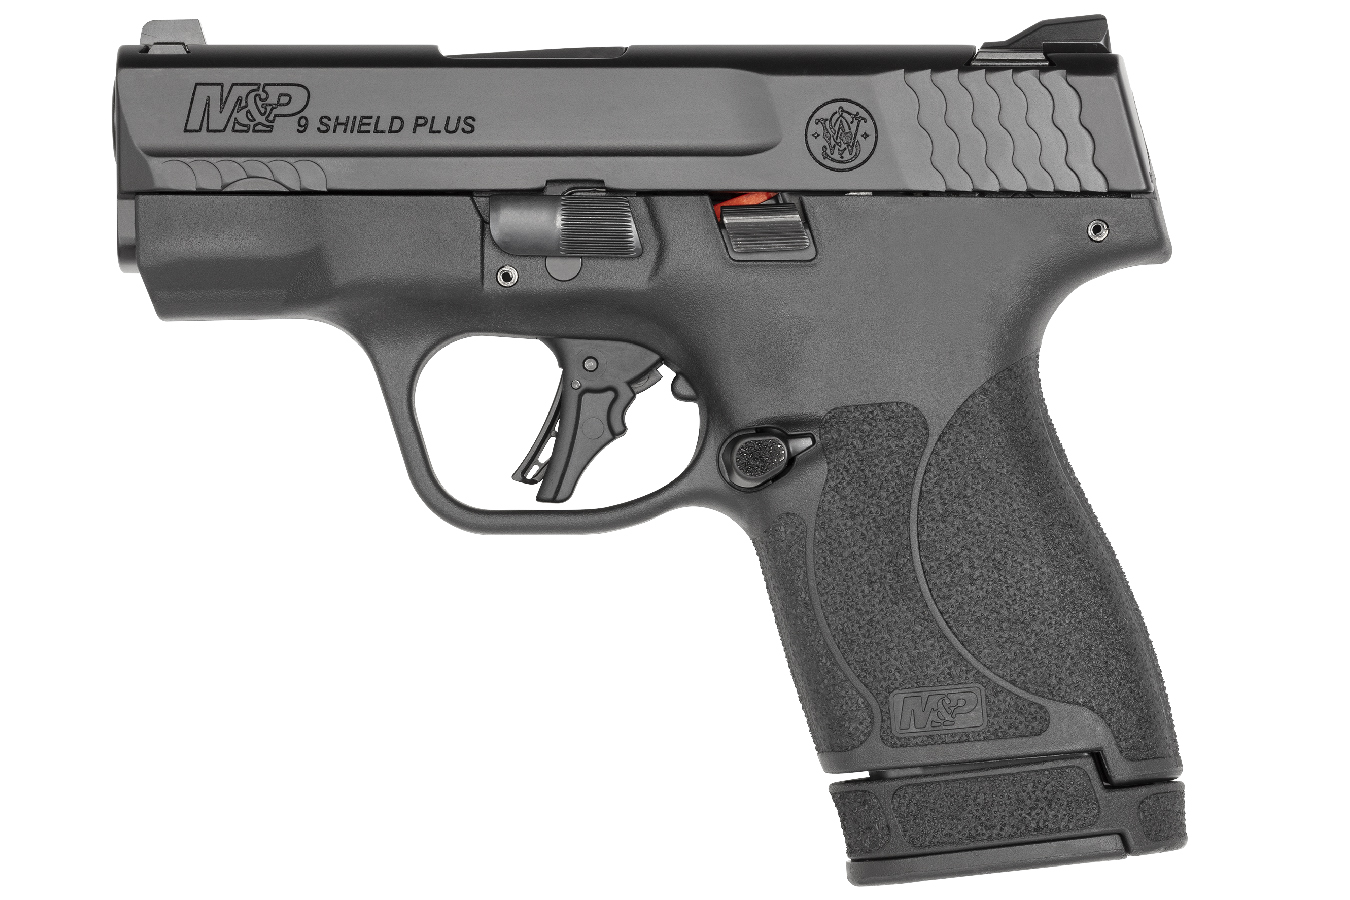 No. 19 Best Selling: SMITH AND WESSON MP9 SHIELD PLUS 9MM MICRO COMPACT PISTOL WITH NO THUMB SAFETY